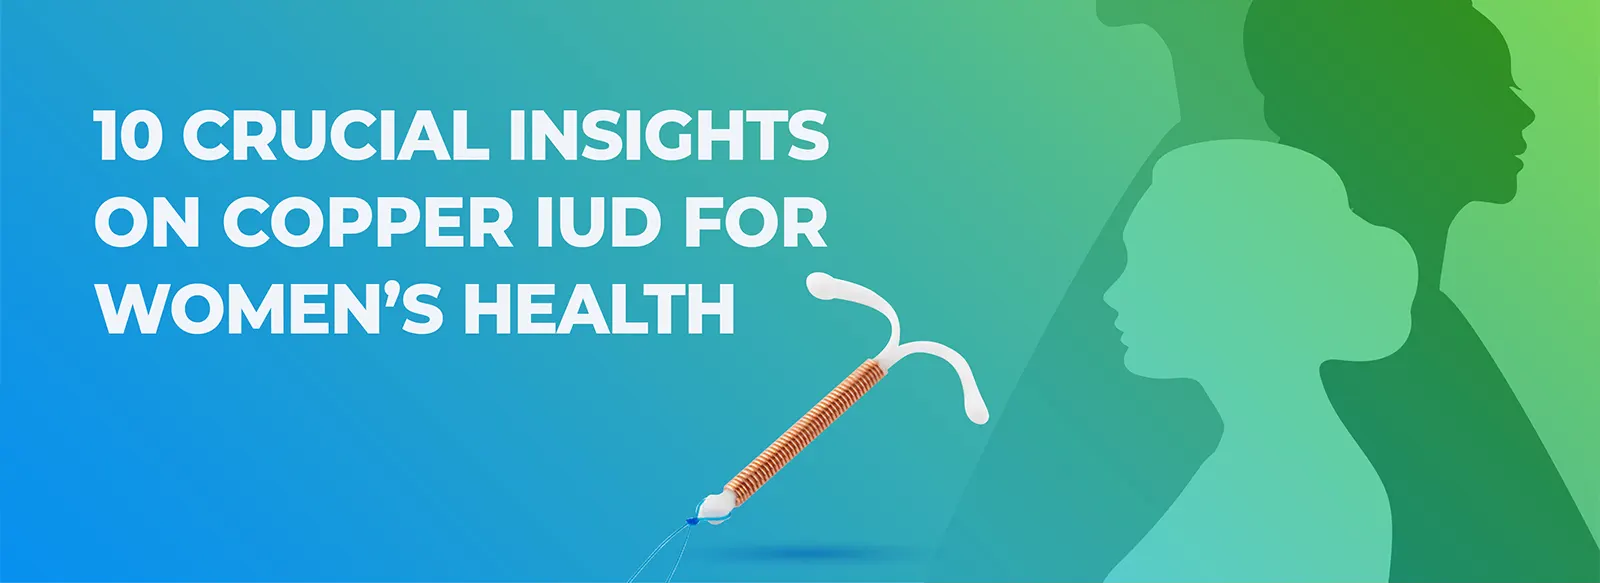 10 crucial insights on copper iud for women's health